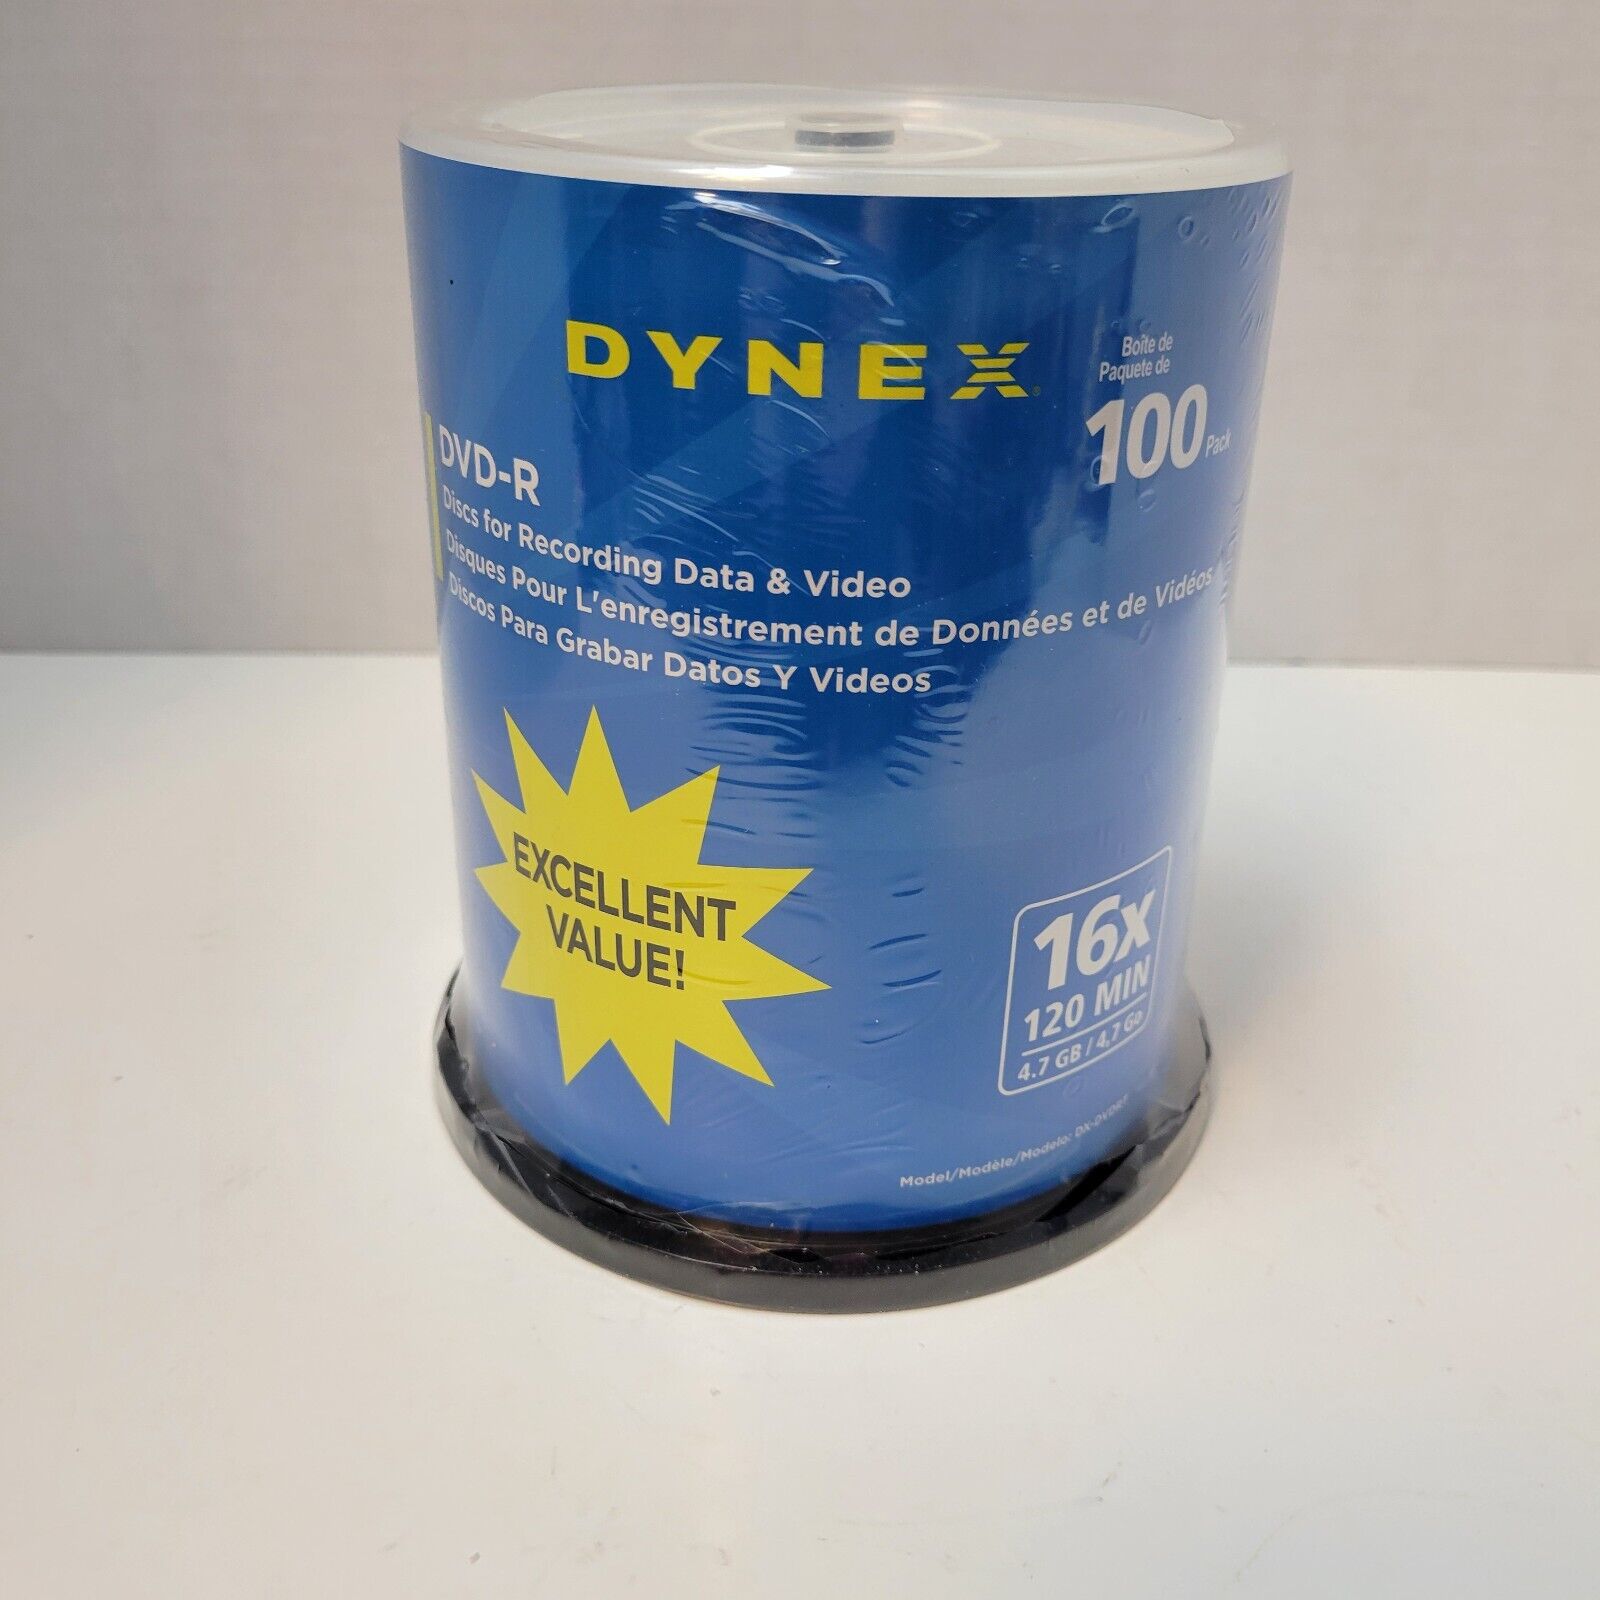 Dynex DVD-R (DVD Recordable Media) Discs - 100 Spindle Pack - 16x 4.7GB - NEW